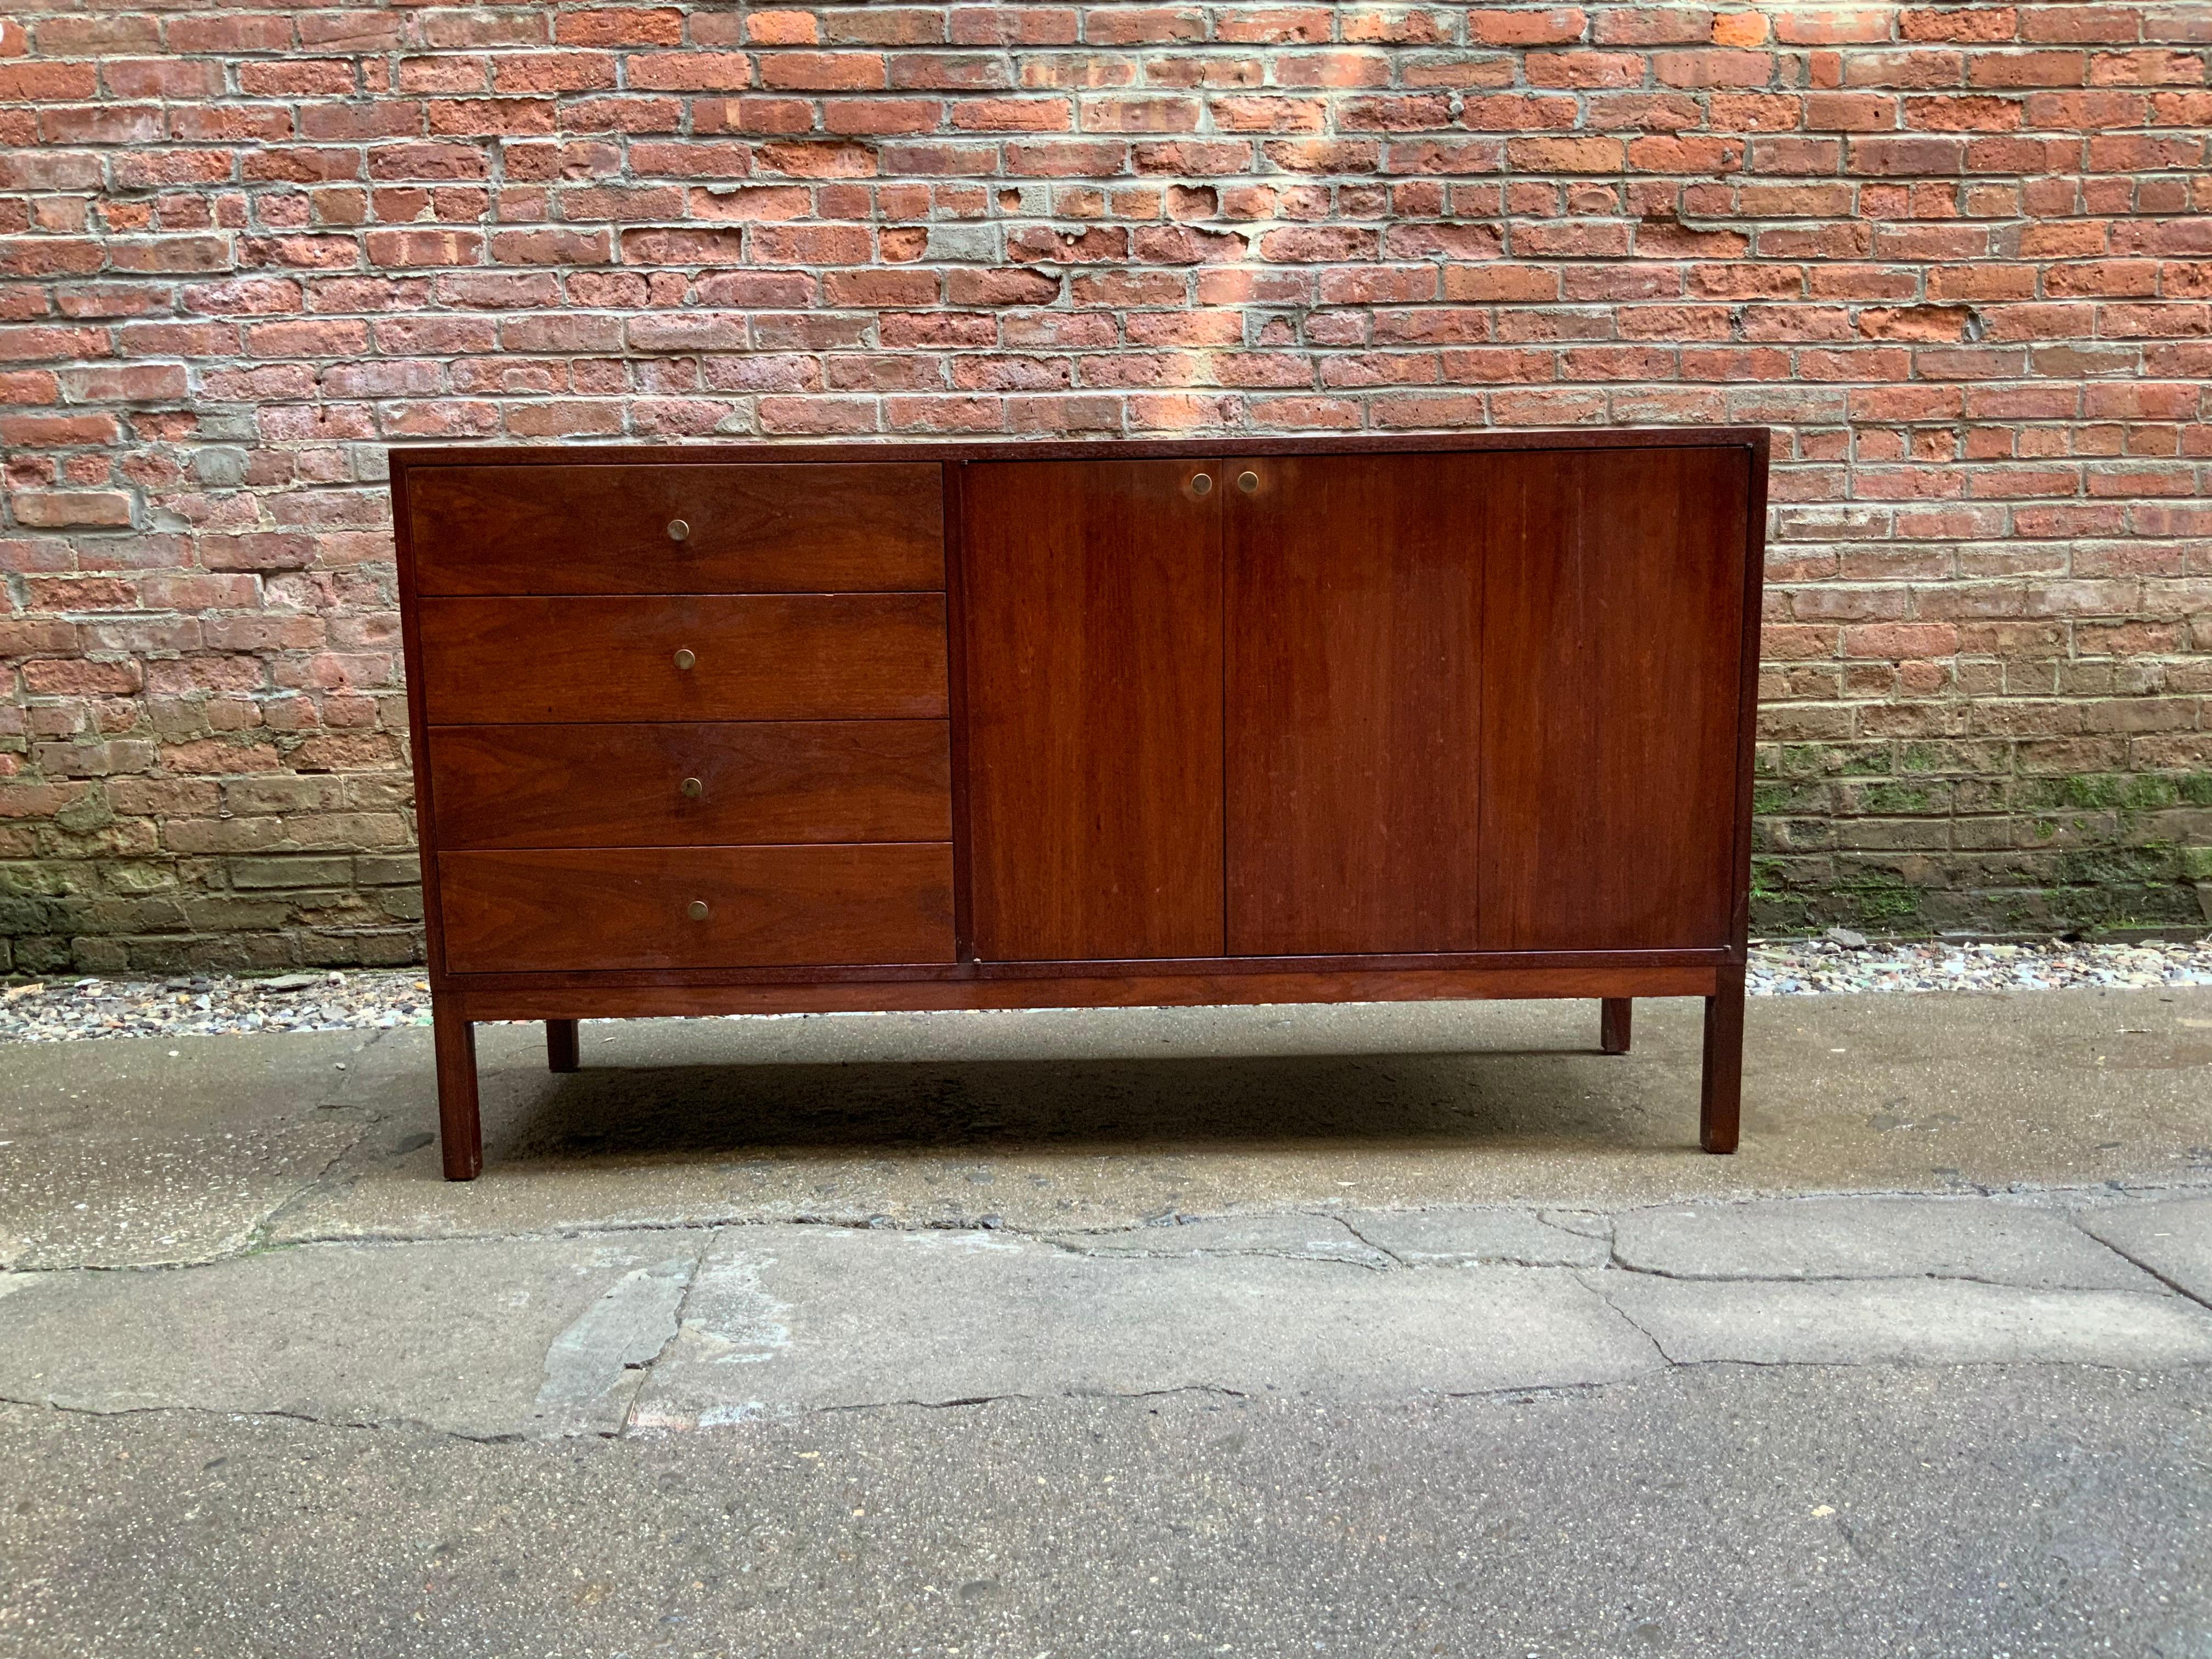 Four deep drawers flanked by two doors with four interior drawers. Brass hardware. Low luster oiled walnut veneers, circa 1960. Reminiscent of Jens Risom or Milo Baughman for Arch Gordon design. Very good condition.

Measures: Approximately 18